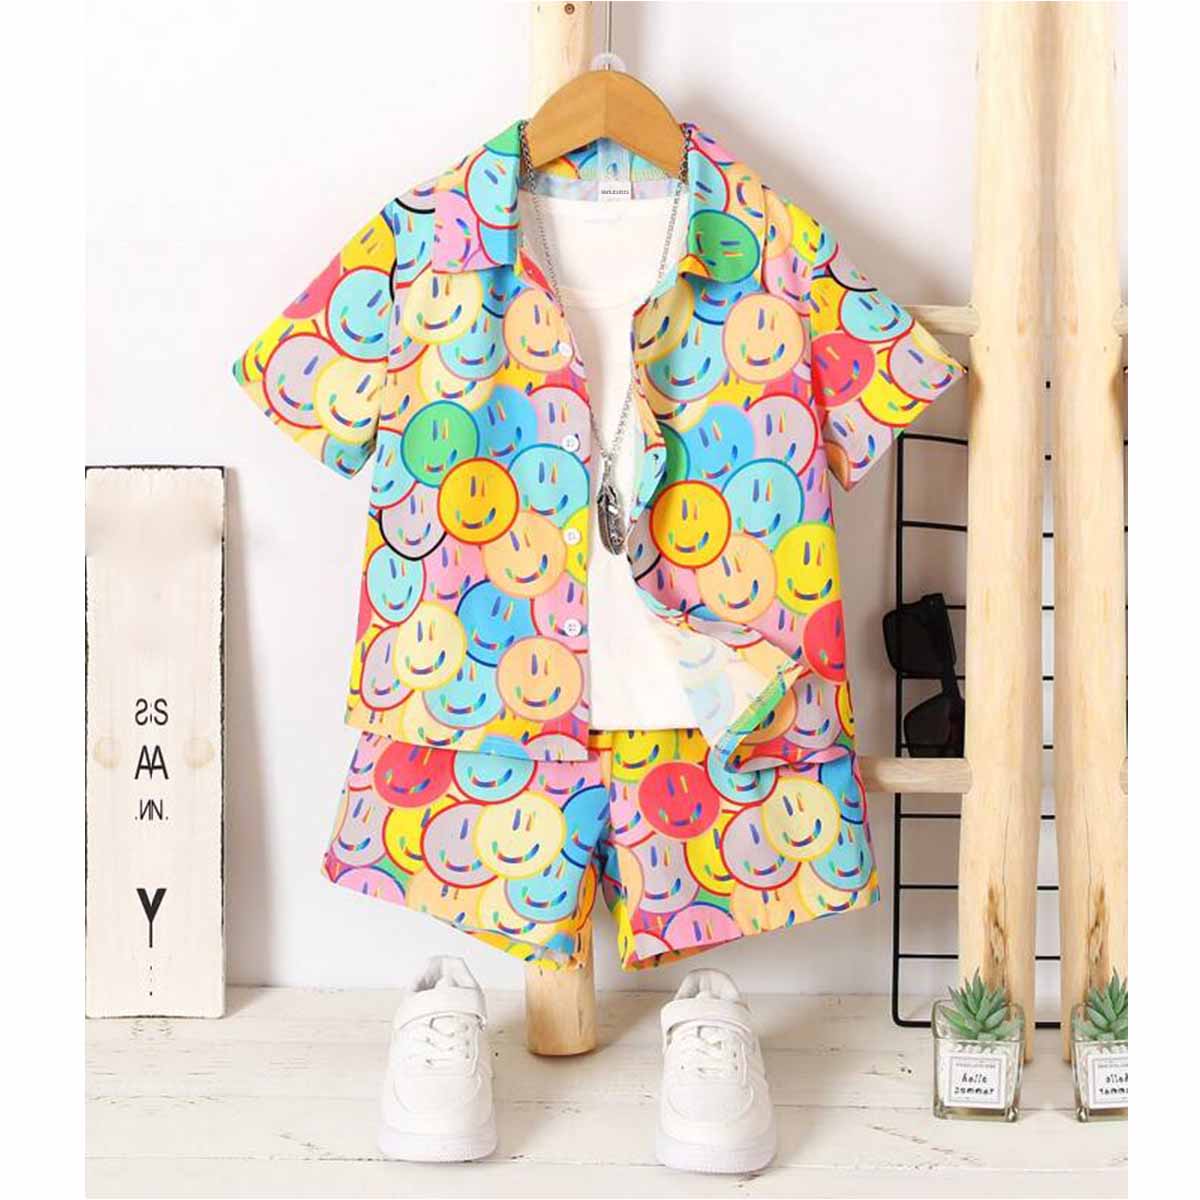 Venutaloza Baby Set Smilie Smilie & Paisley Scarf Casual (Combo Pack Of 2) Shirt & Shorts Without tee Two Piece Set For Boy & Girls.